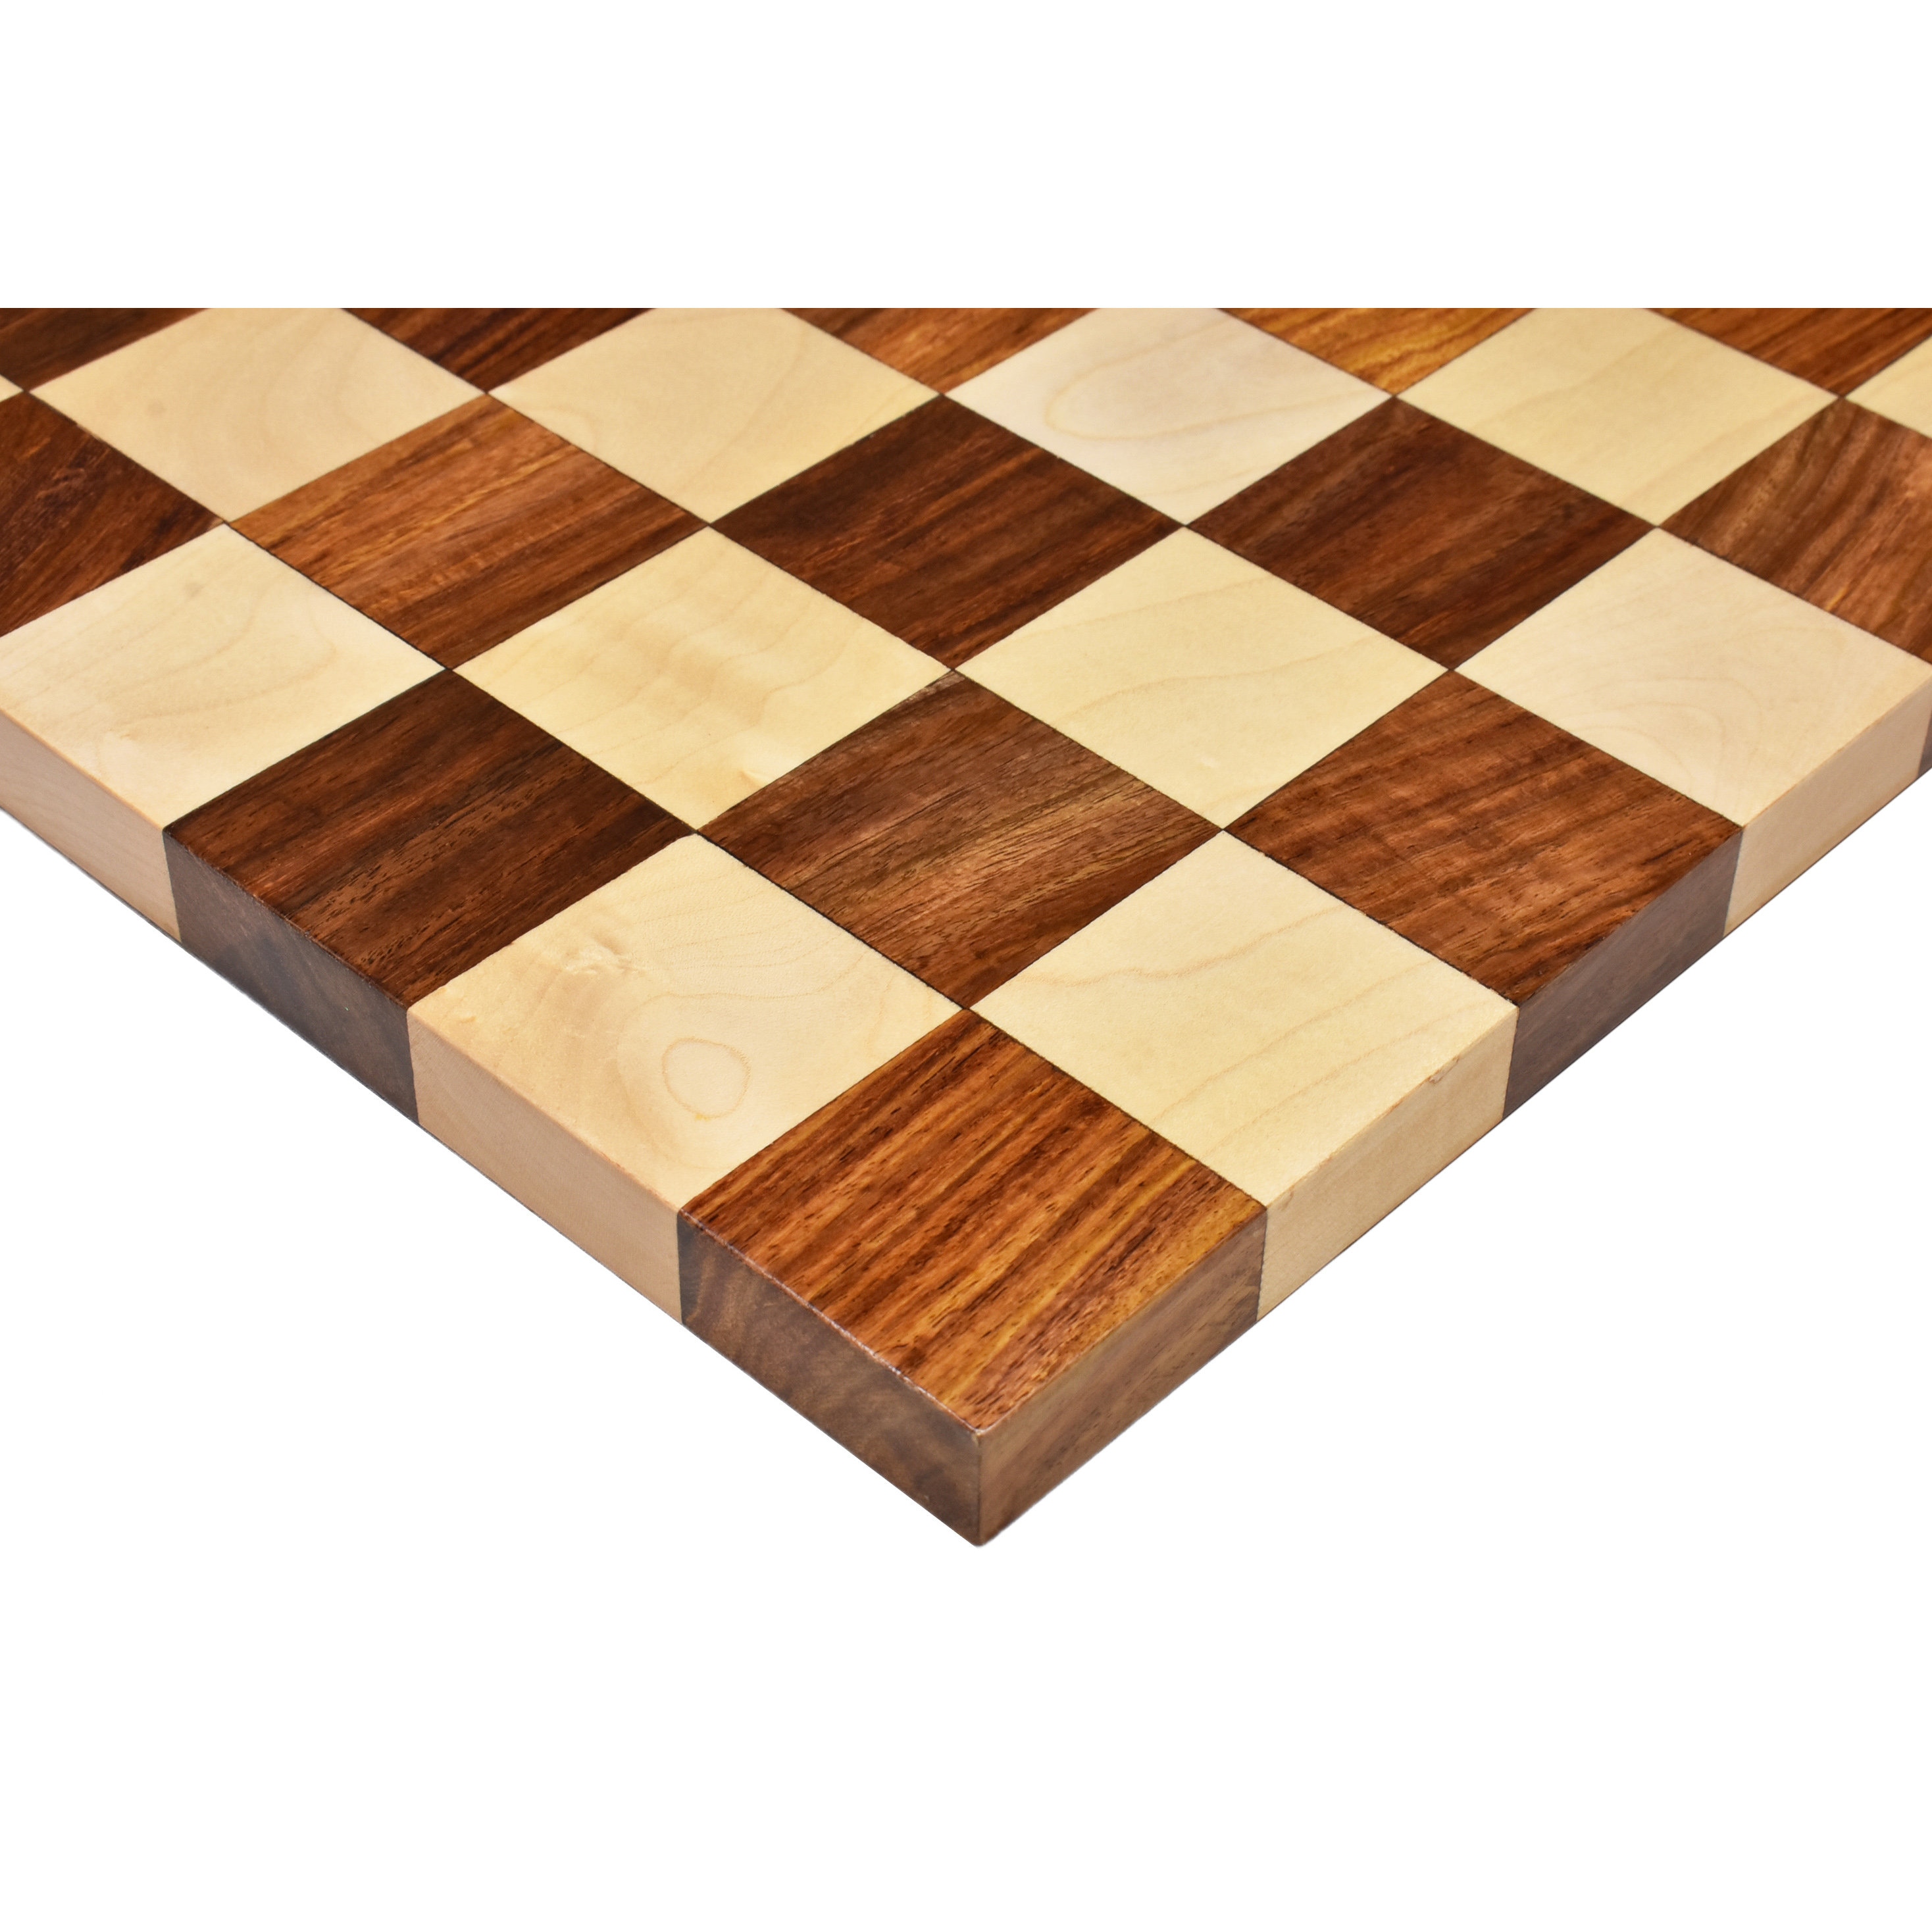 Size 2" Sq Narrow Border Flat Wooden Chess Board 19" Golden Rosewood/Maple 